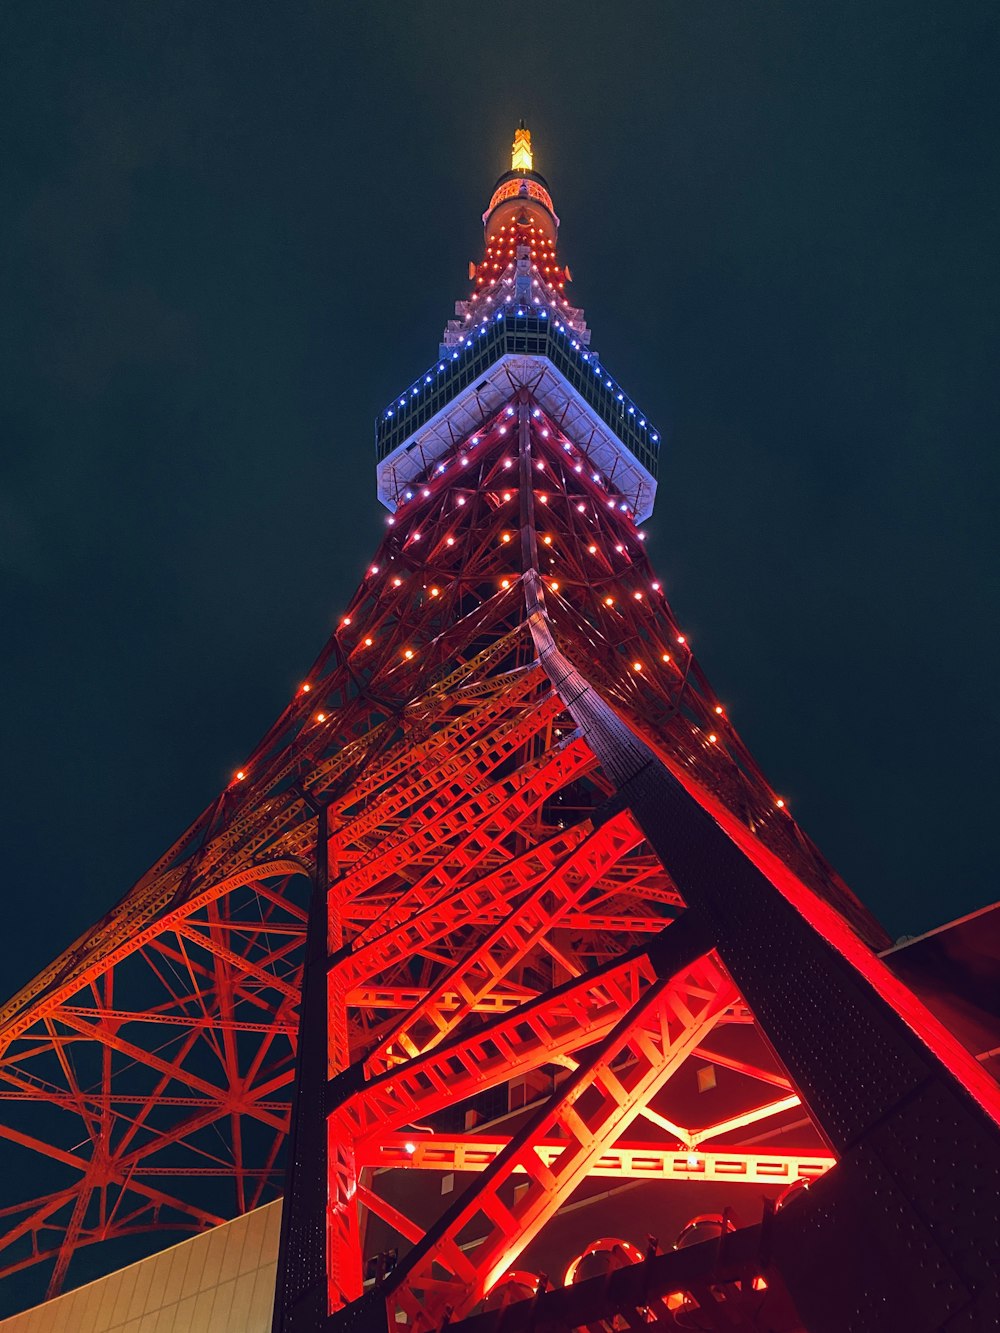 500 Tokyo Tower Pictures Download Free Images On Unsplash